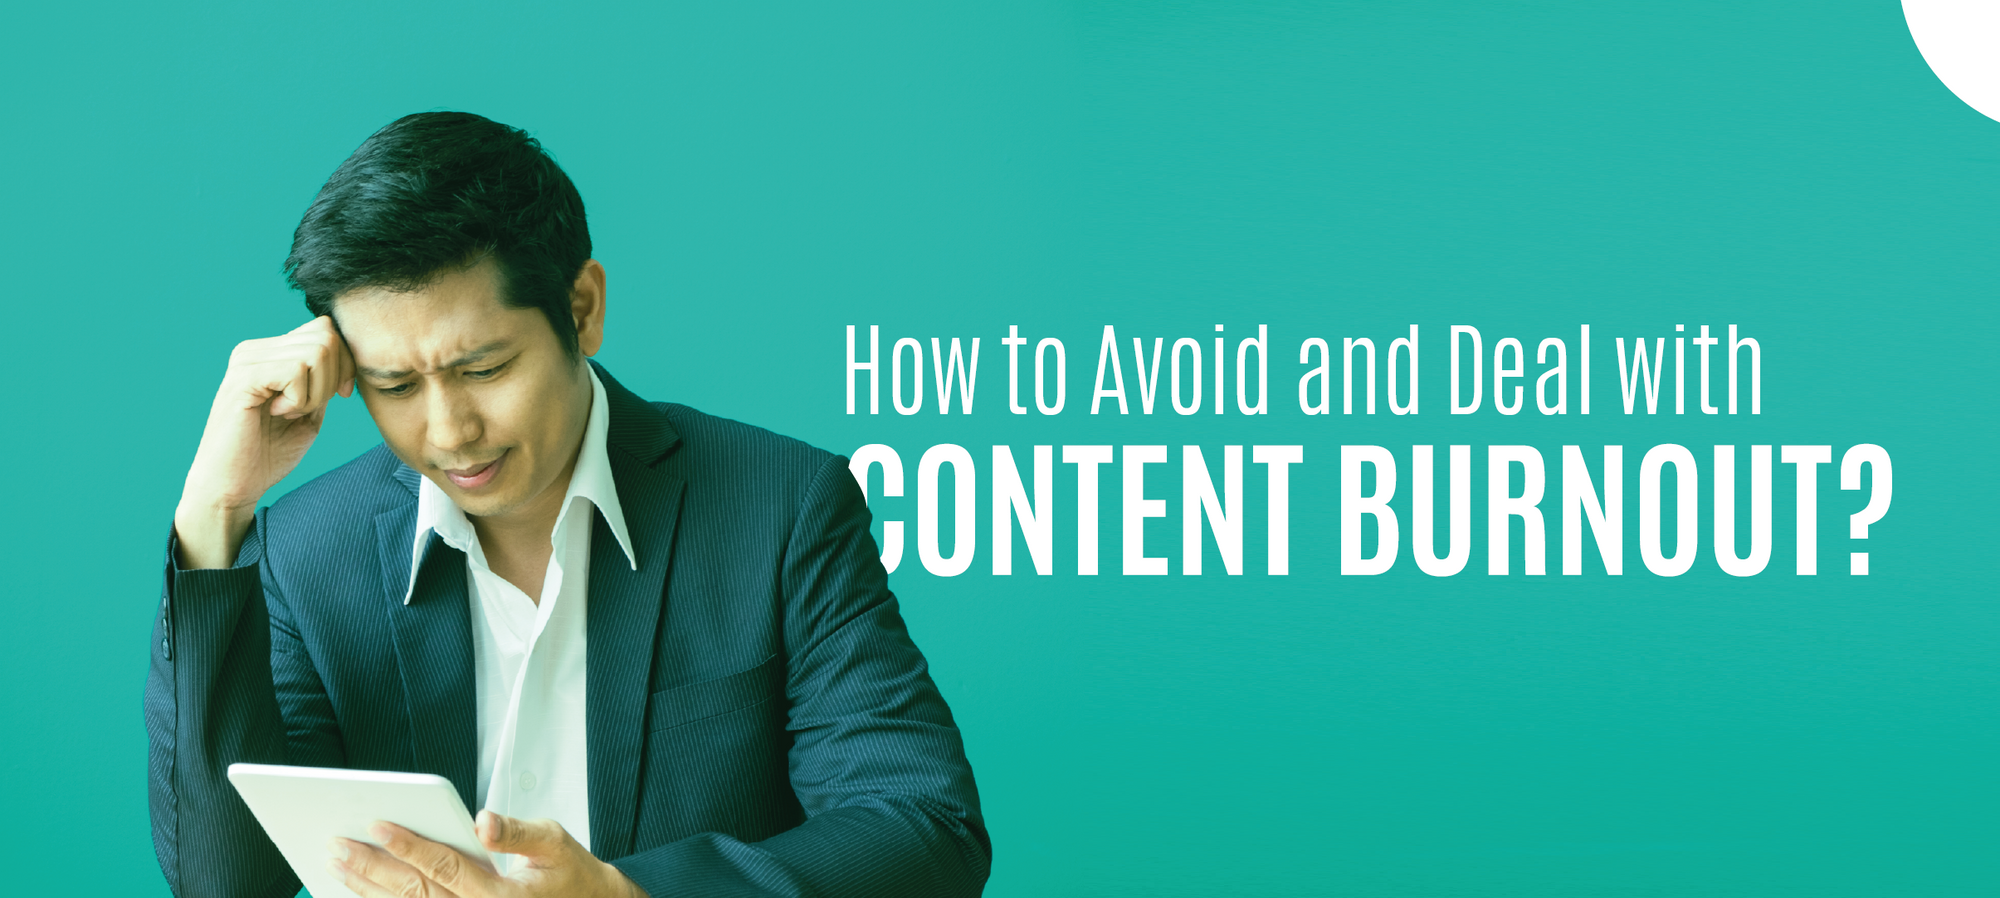 Content burnout is common, but getting stuck at it can lead to loss. 